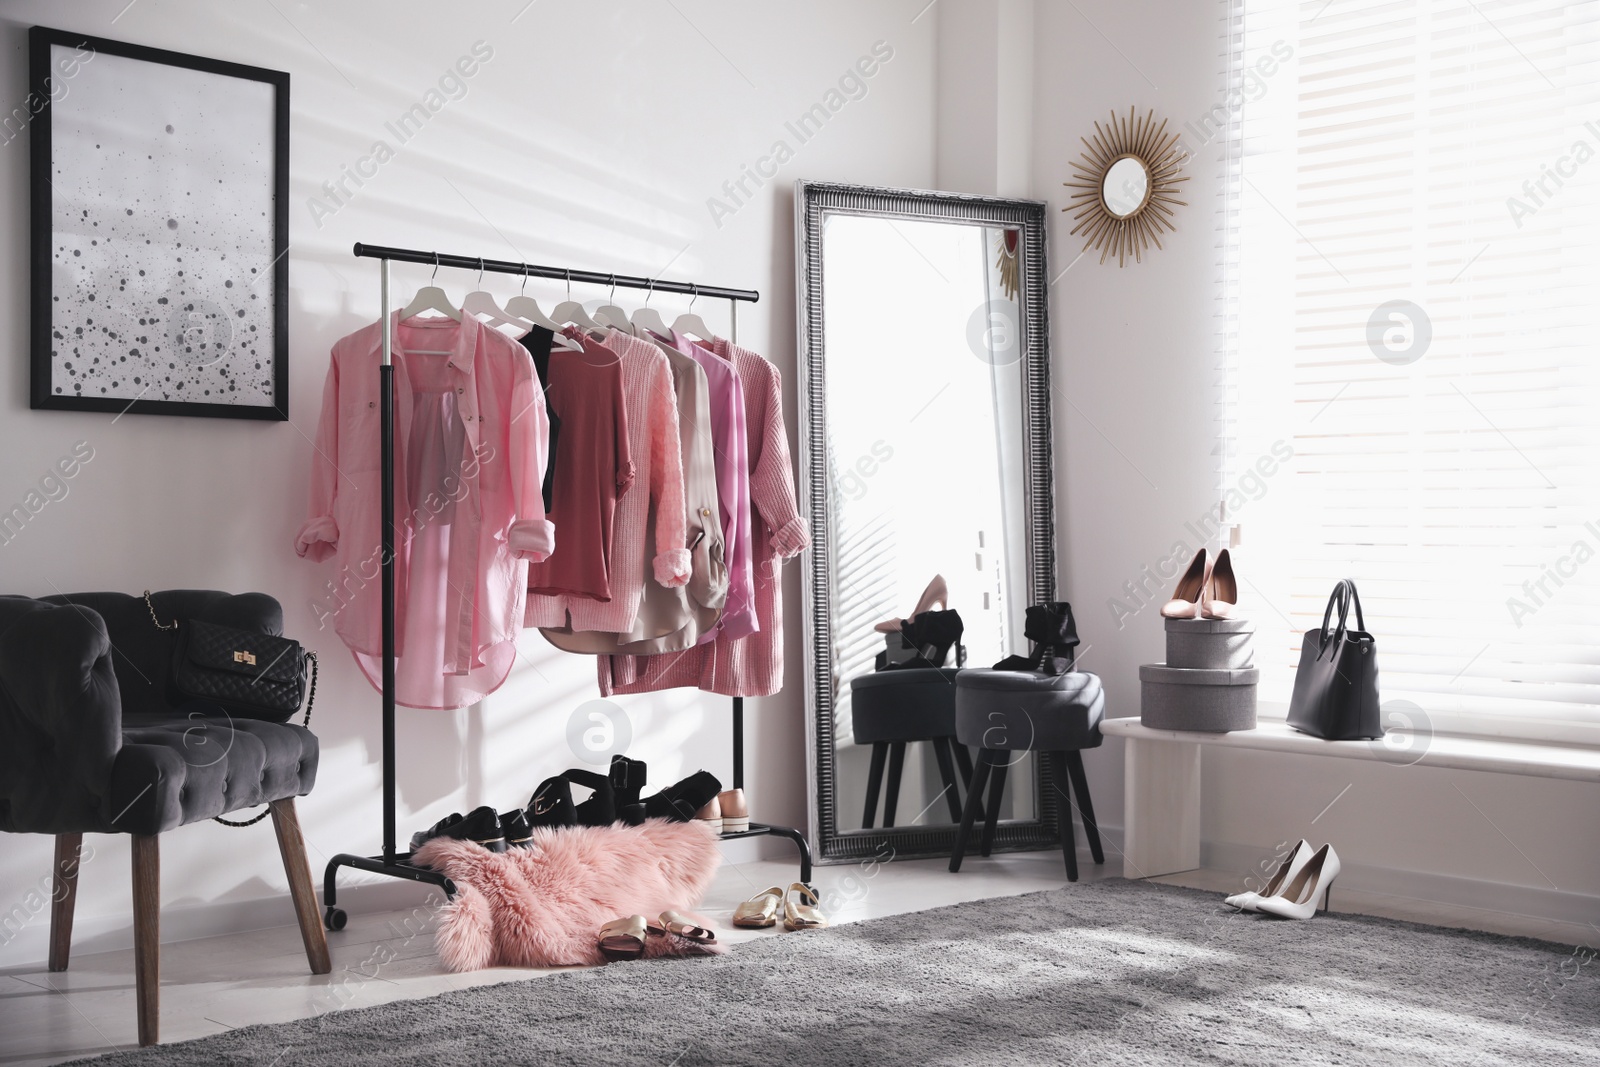 Photo of Dressing room interior with clothing rack and comfortable chair